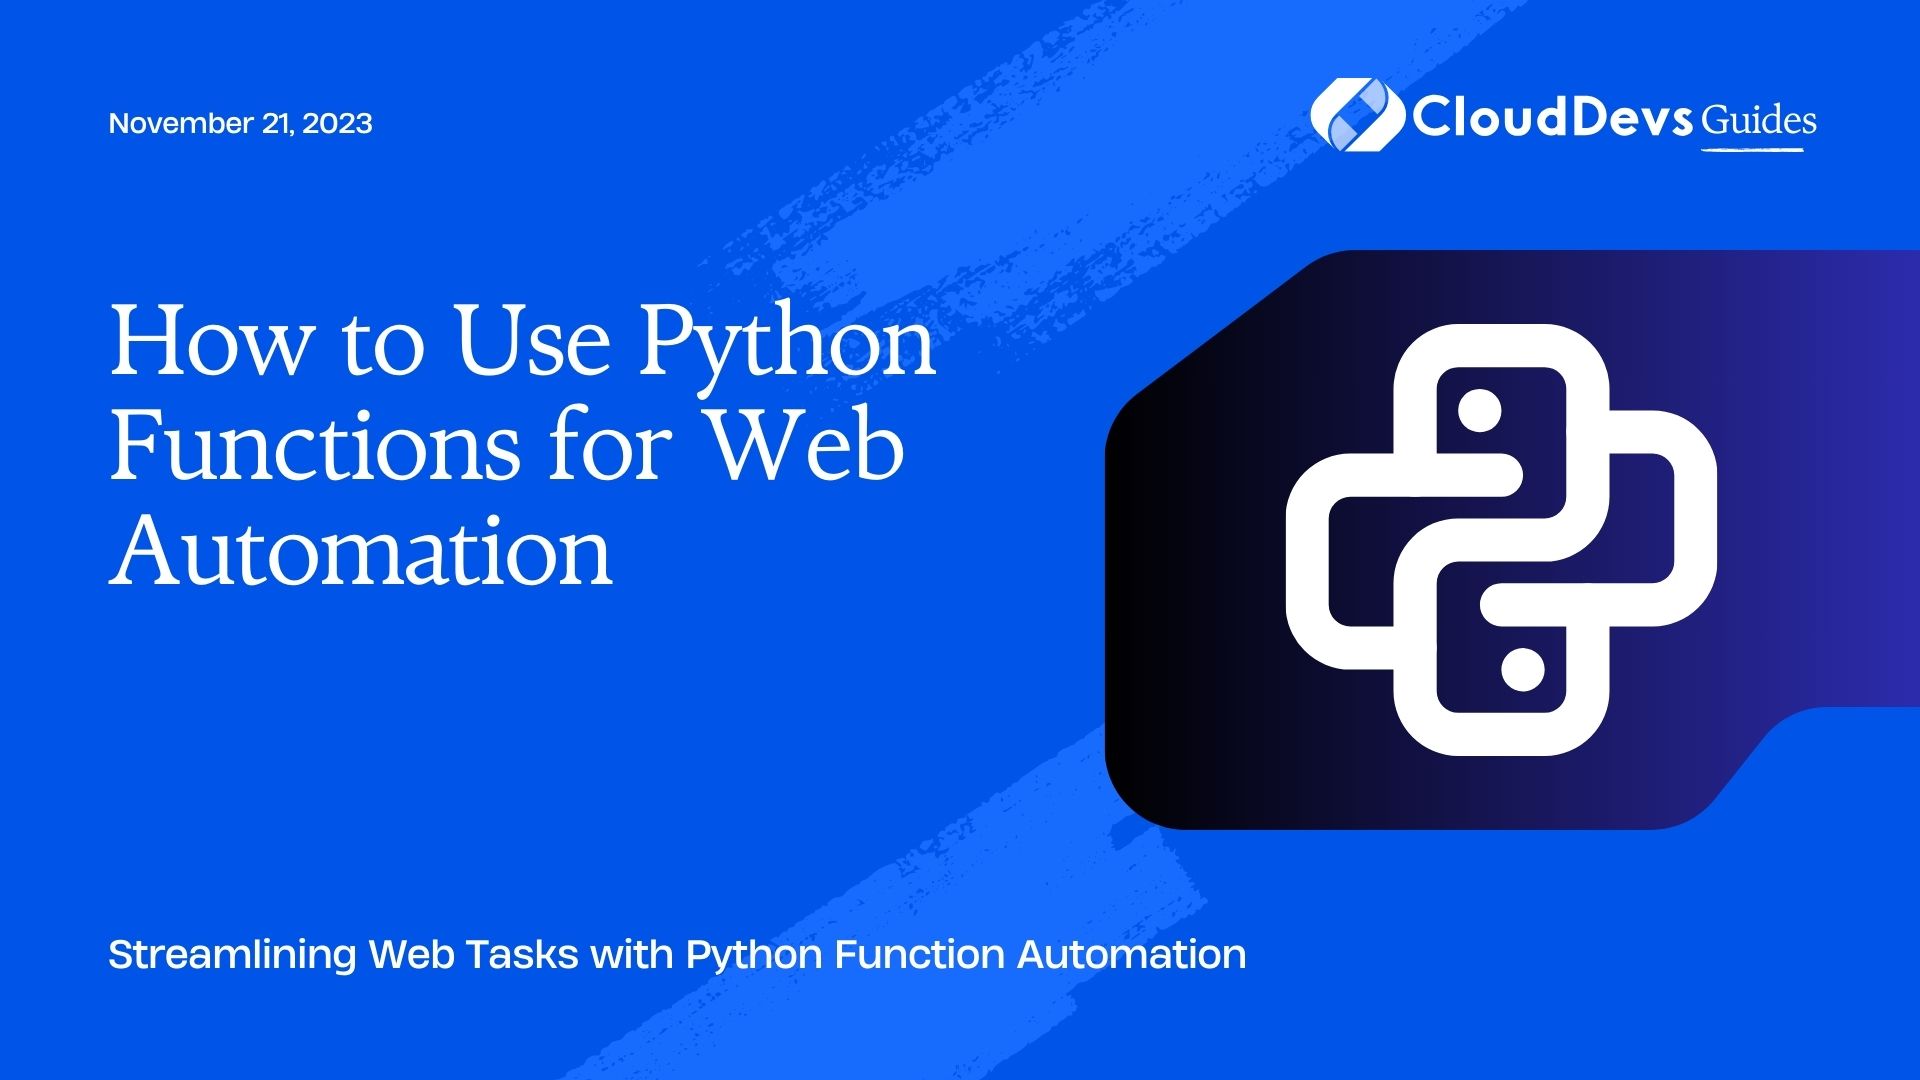 How to Use Python Functions for Web Automation